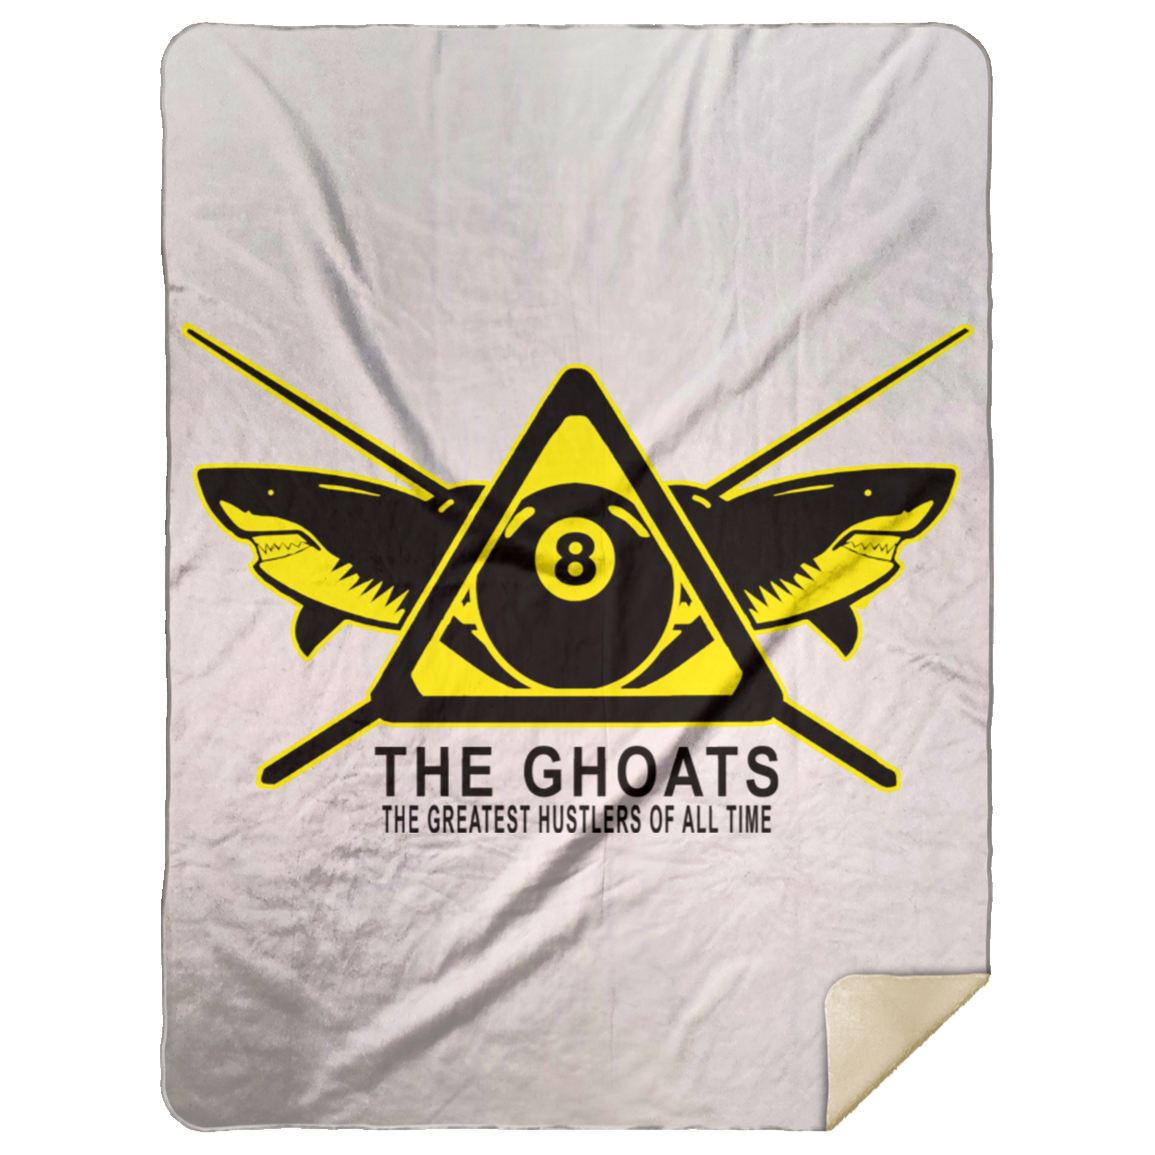 The GHOATS custom design #31. Shark Sighted. Male Pool Shark. Shoot At Your Own Risk. Pool / Billiards. Premium Mink Sherpa Blanket 60x80